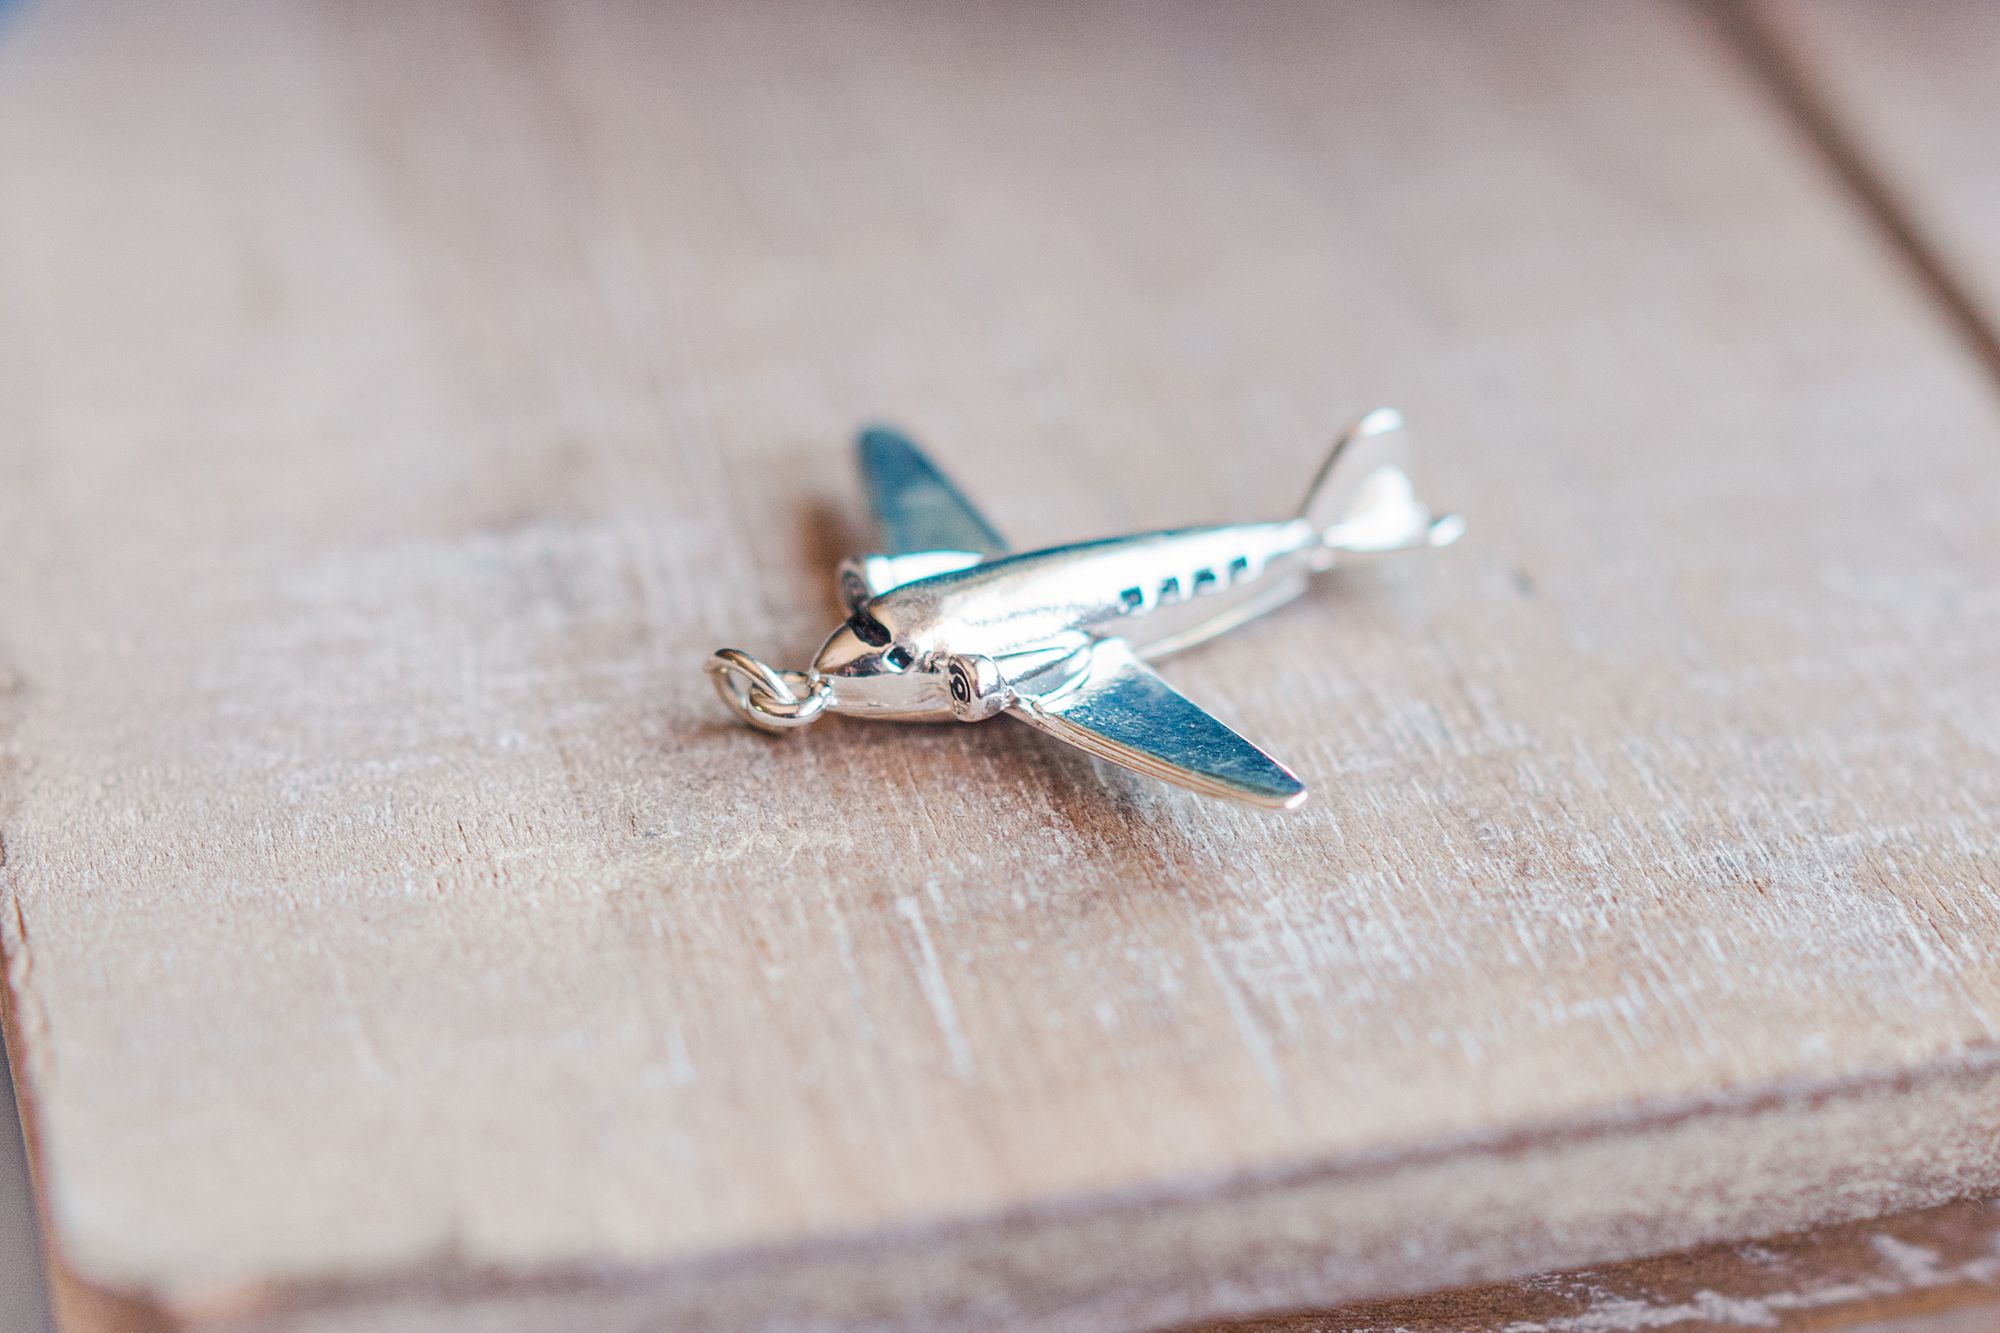 a small silver airplane